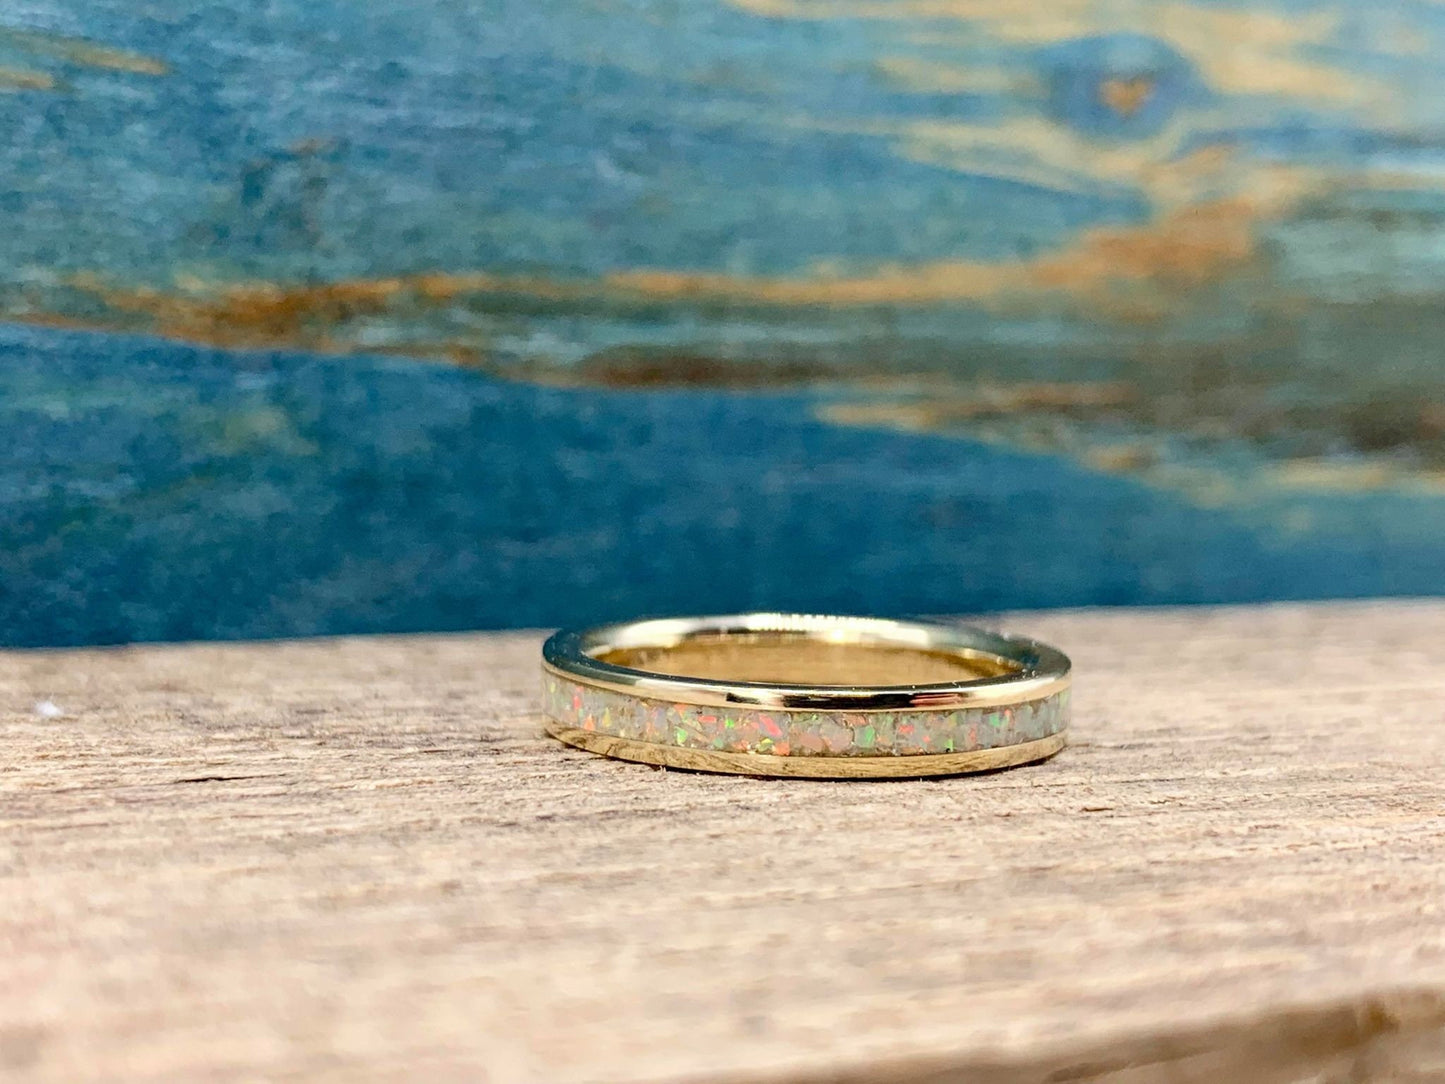 10K Gold and White Opal Engagement Band- Custom Made Ring- 3MM Yellow Gold Opal Inlay Ring - Personalized Gift for her - Robandlean